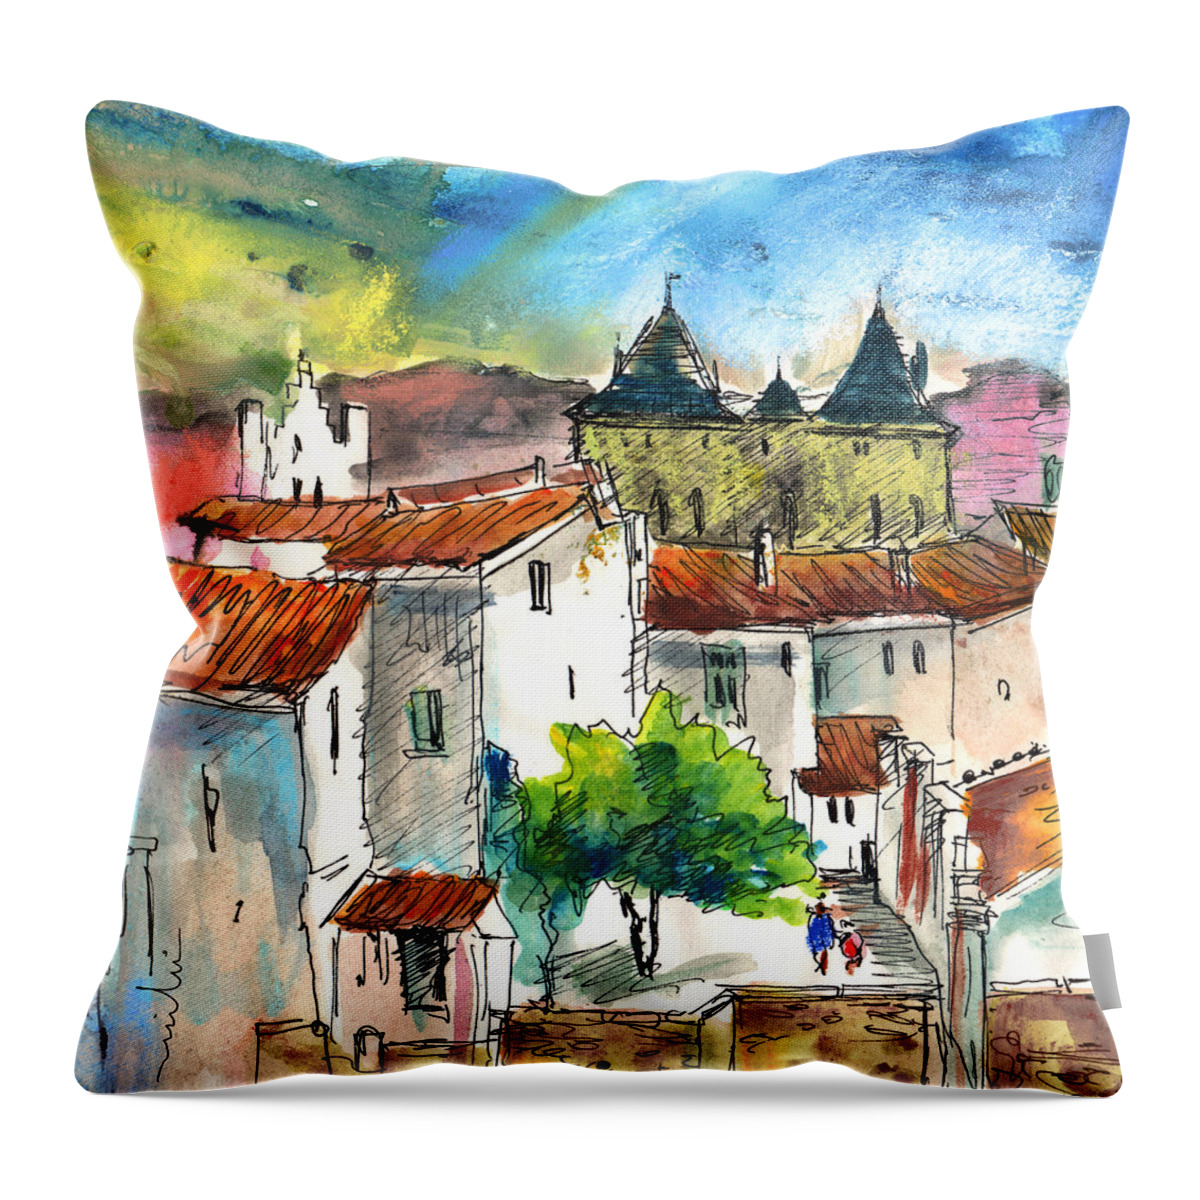 Travel Throw Pillow featuring the painting Pezens 04 by Miki De Goodaboom